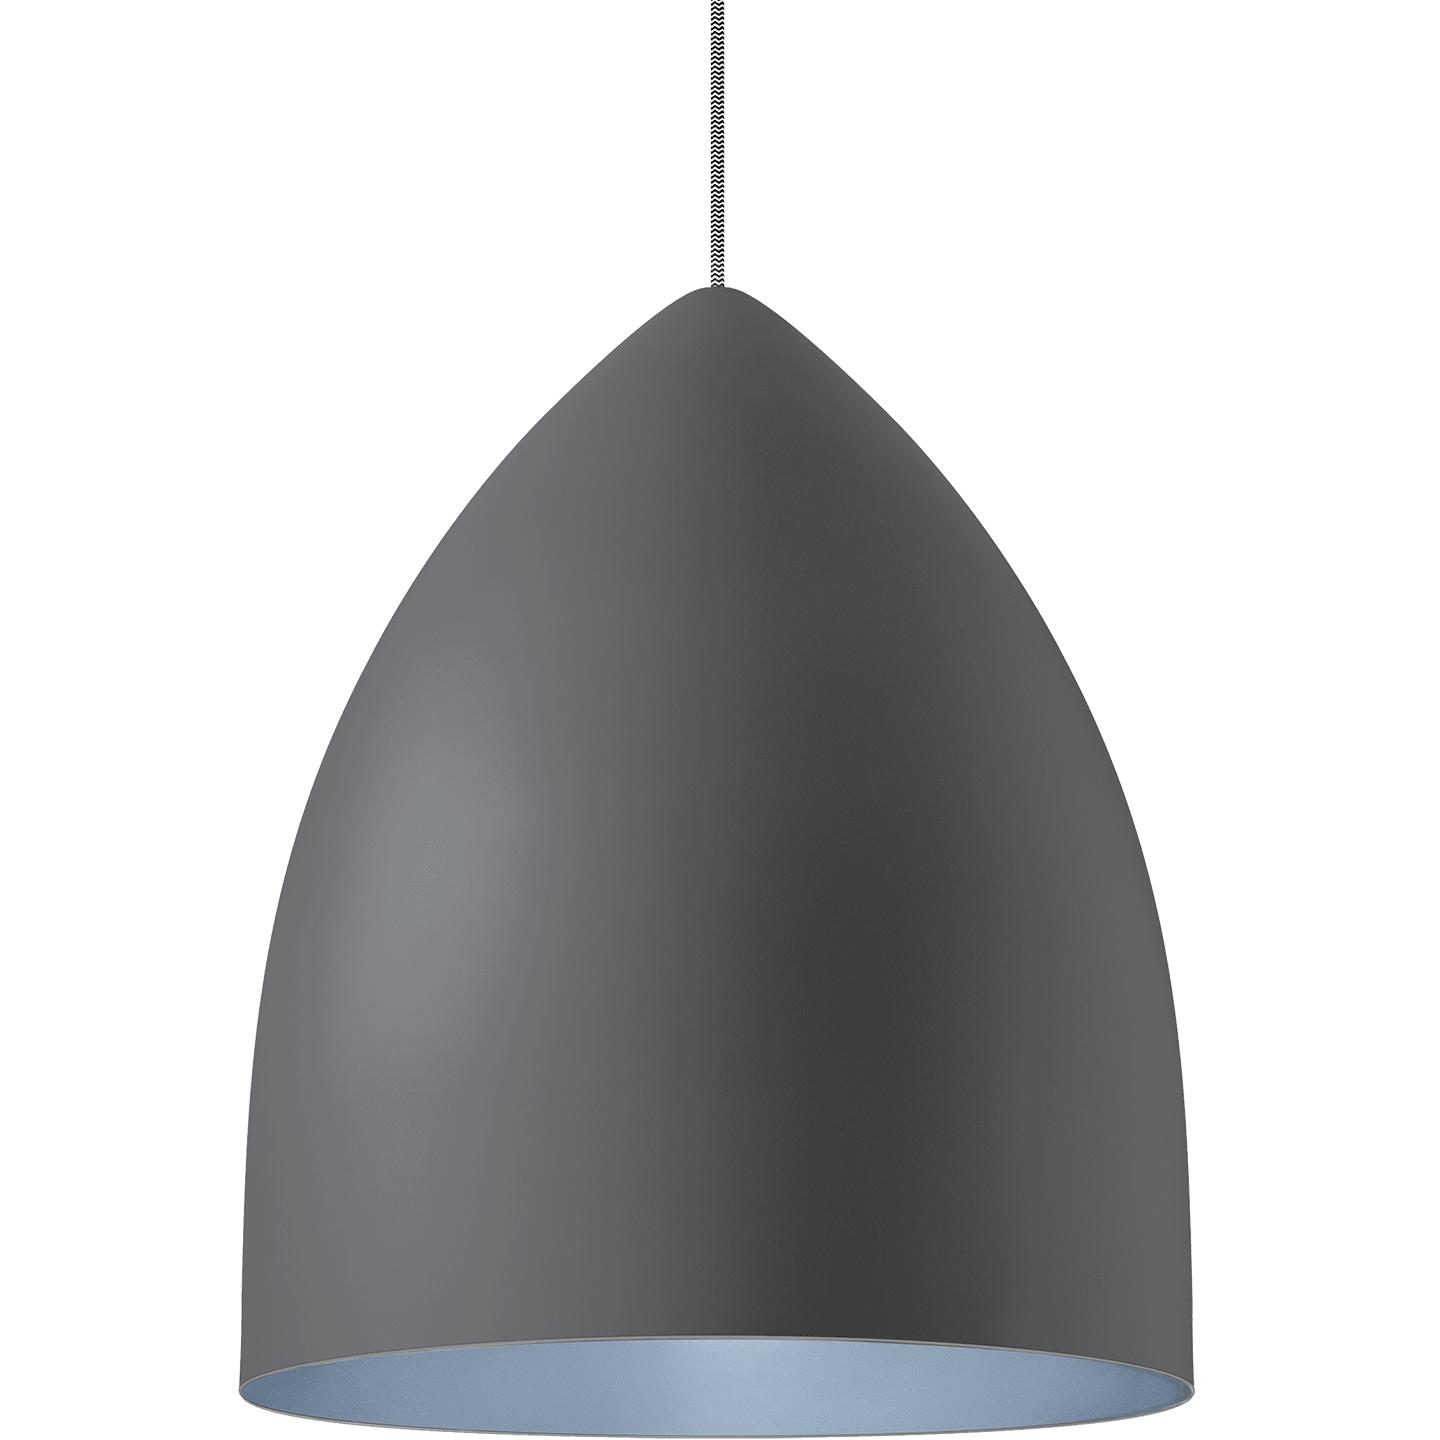 Rubberized Gray/Blue Lamp Not Included